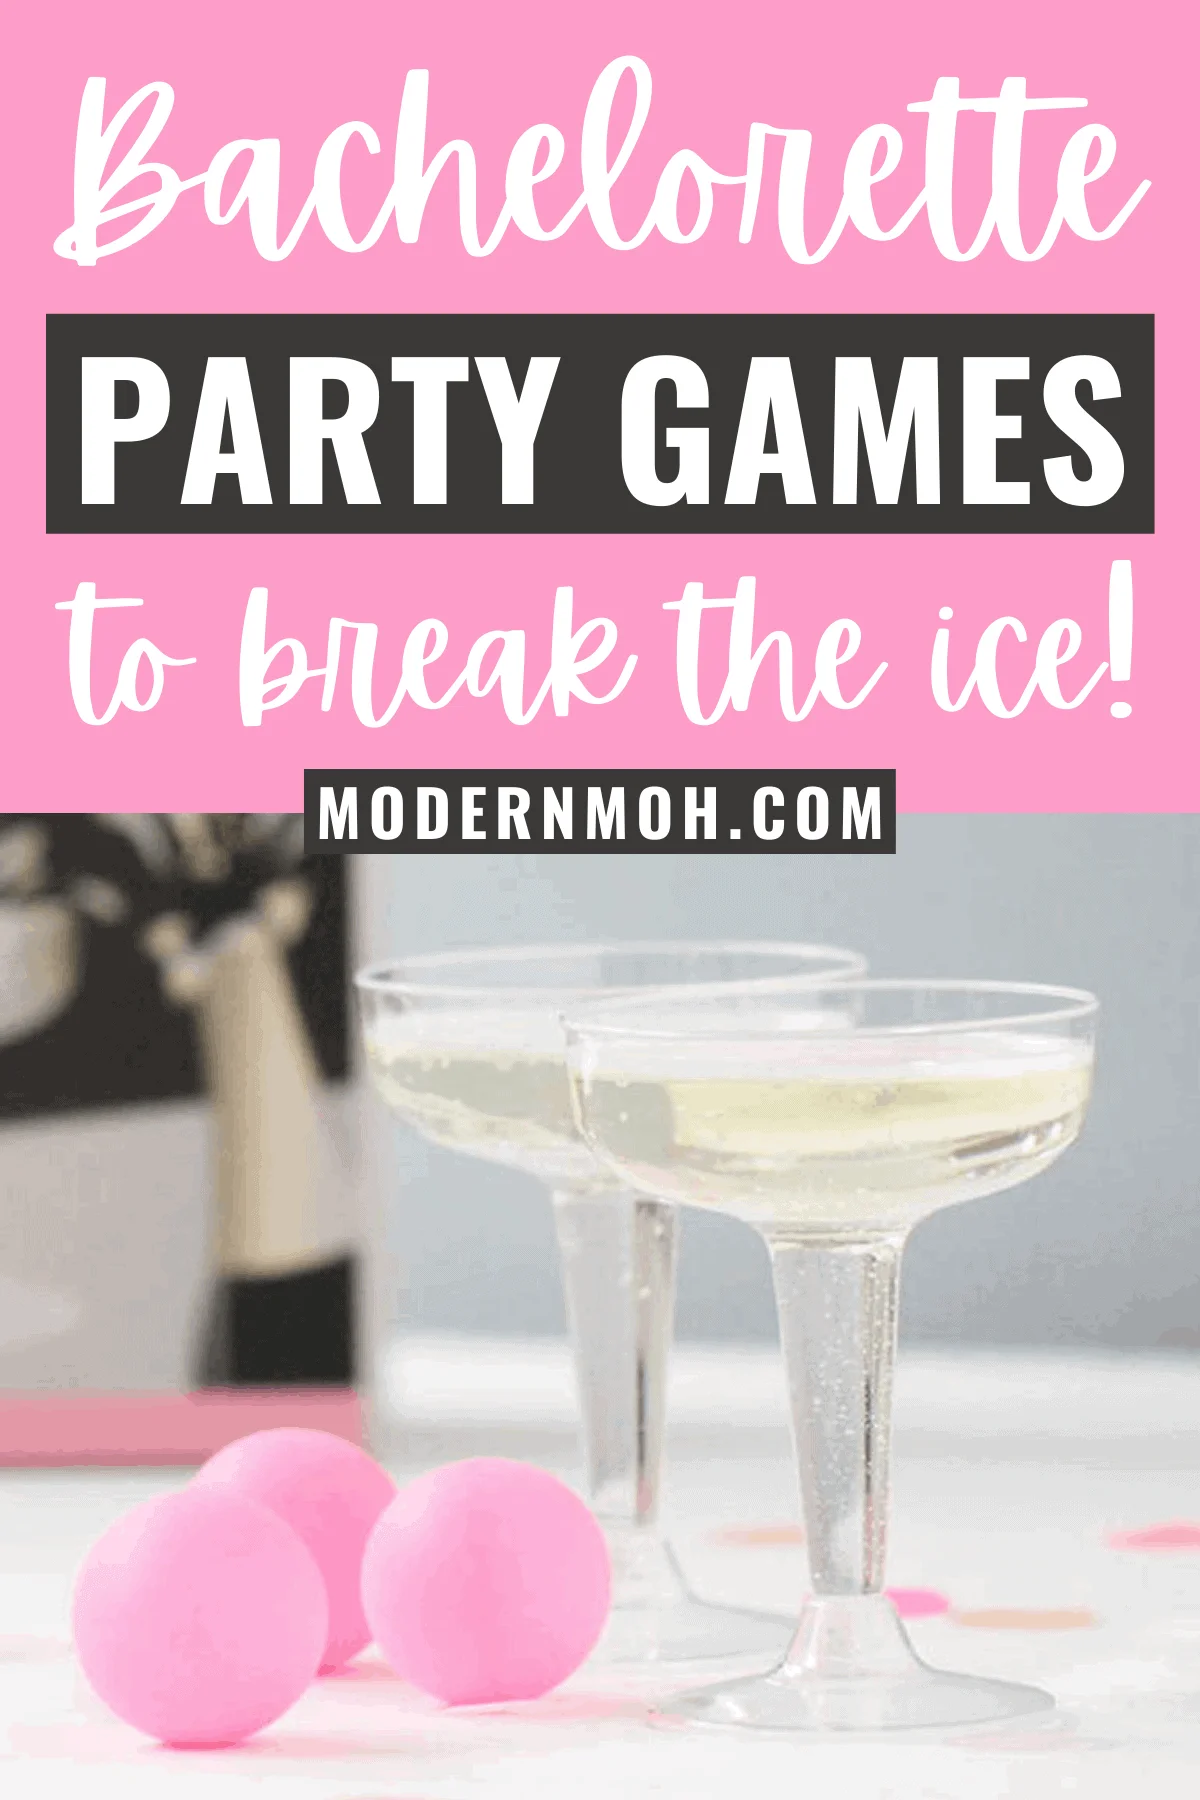 11 Bachelorette Party Games to Kick Off Your Girls Night Out